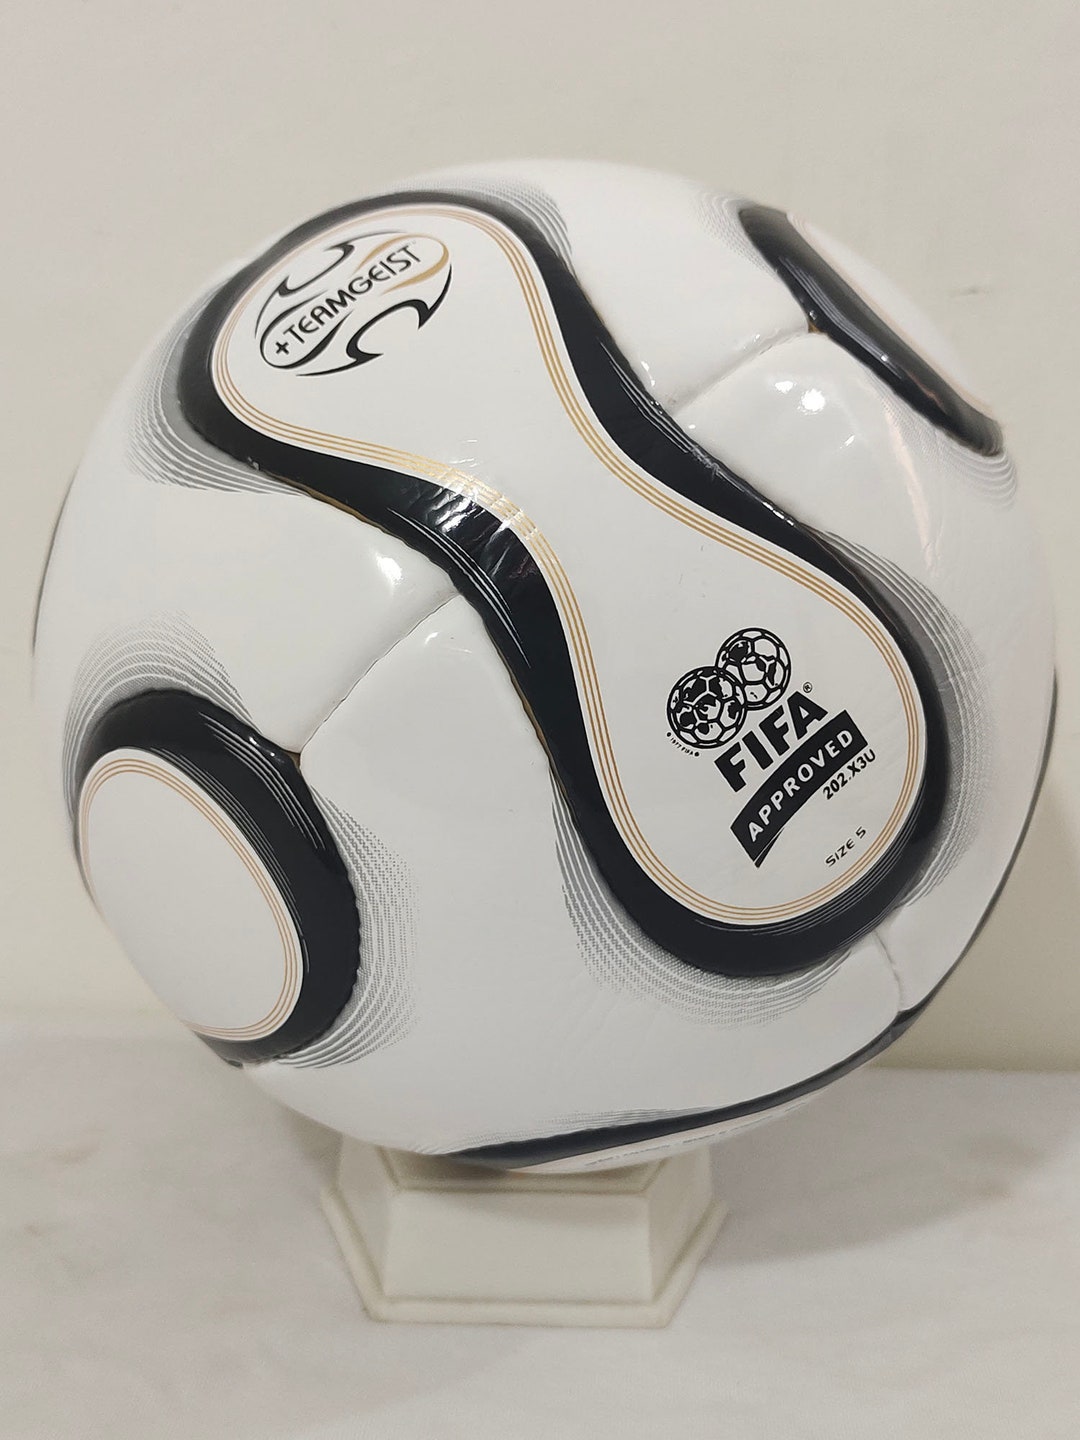 Official Ball World Cup Soccer Ball 2006 - Etsy